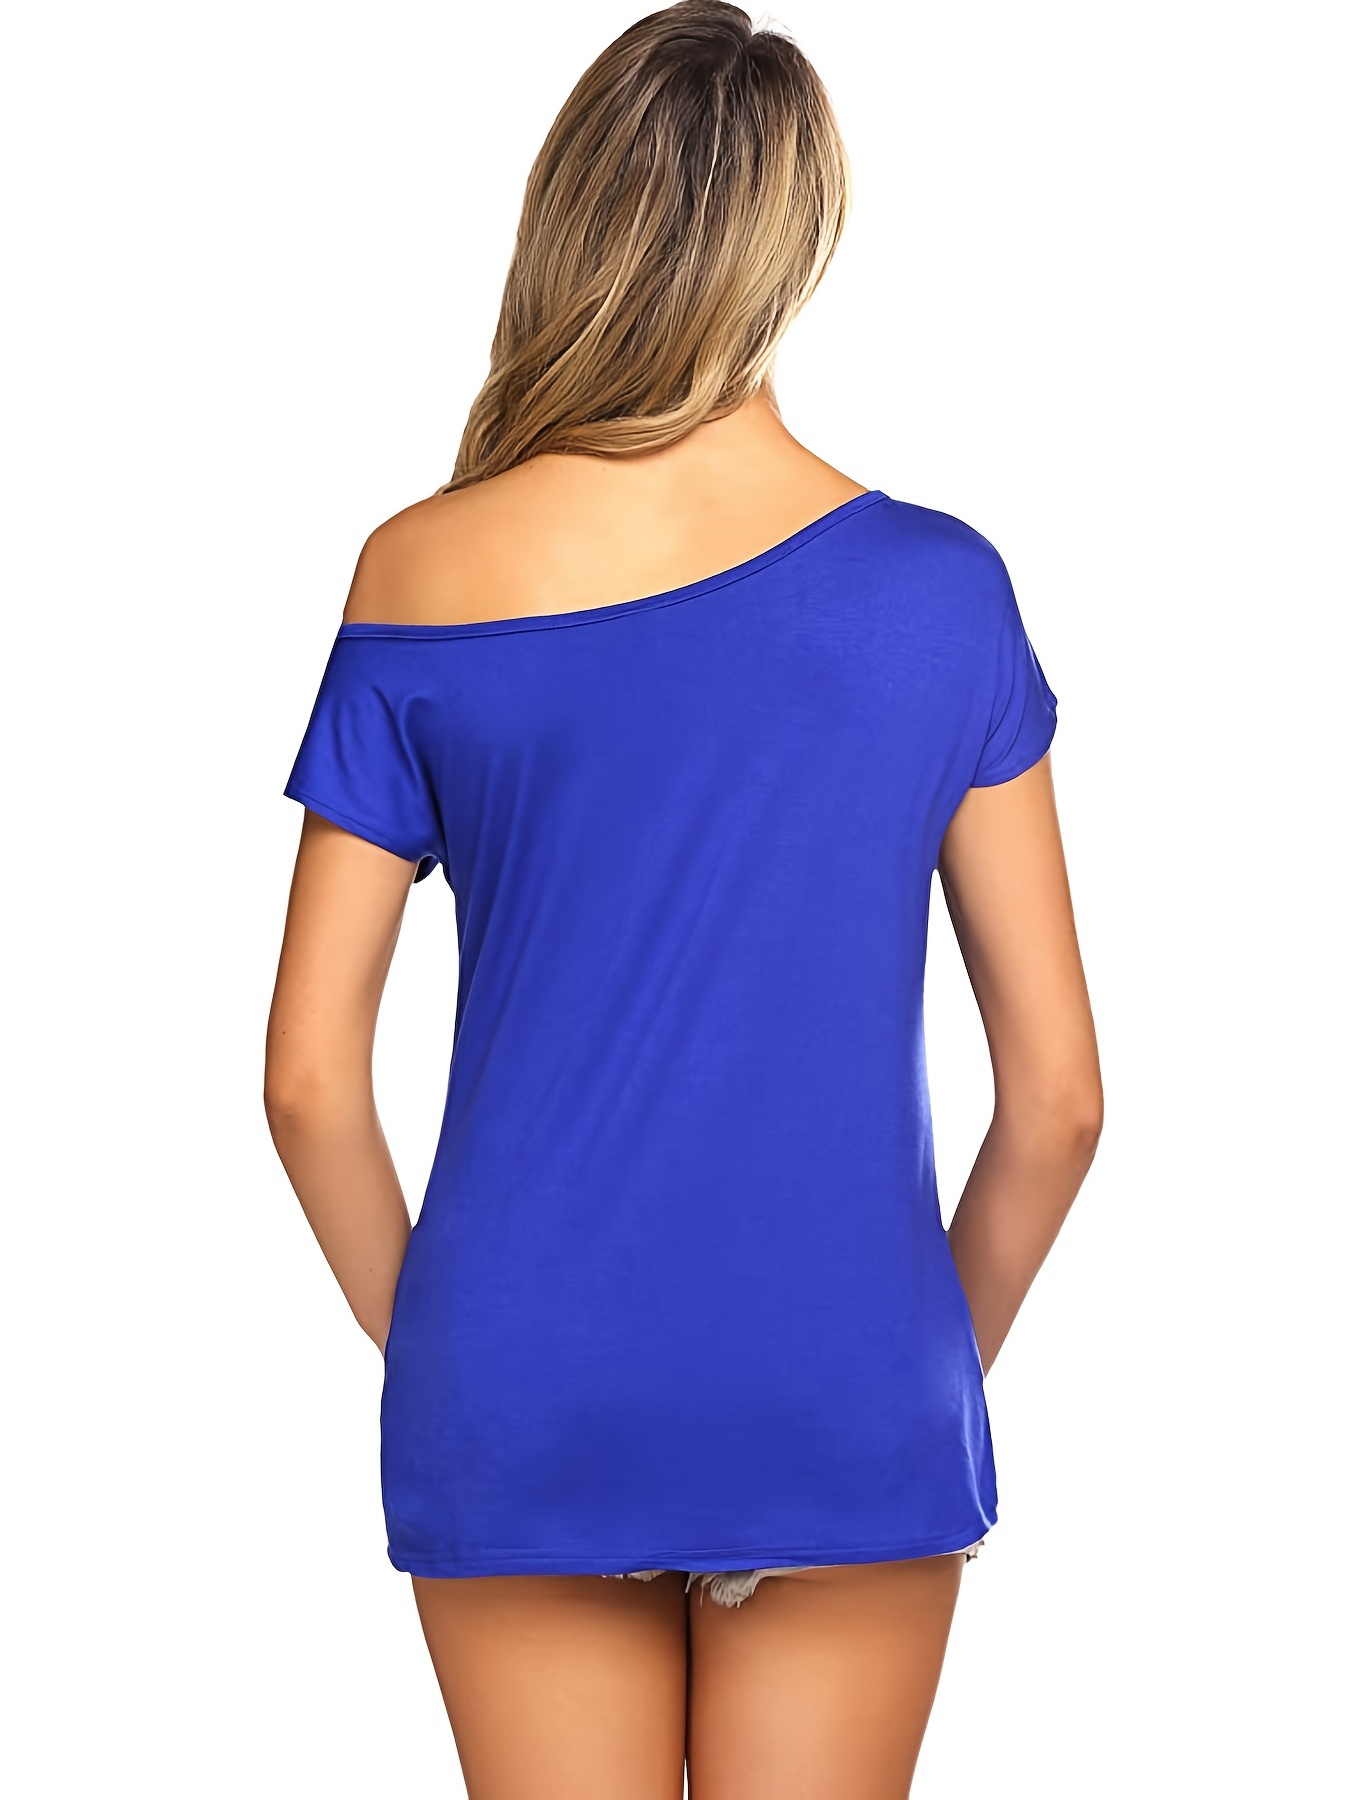 Beluring Women's Summer Shirts Short Sleeve Tops Solid Color Tees